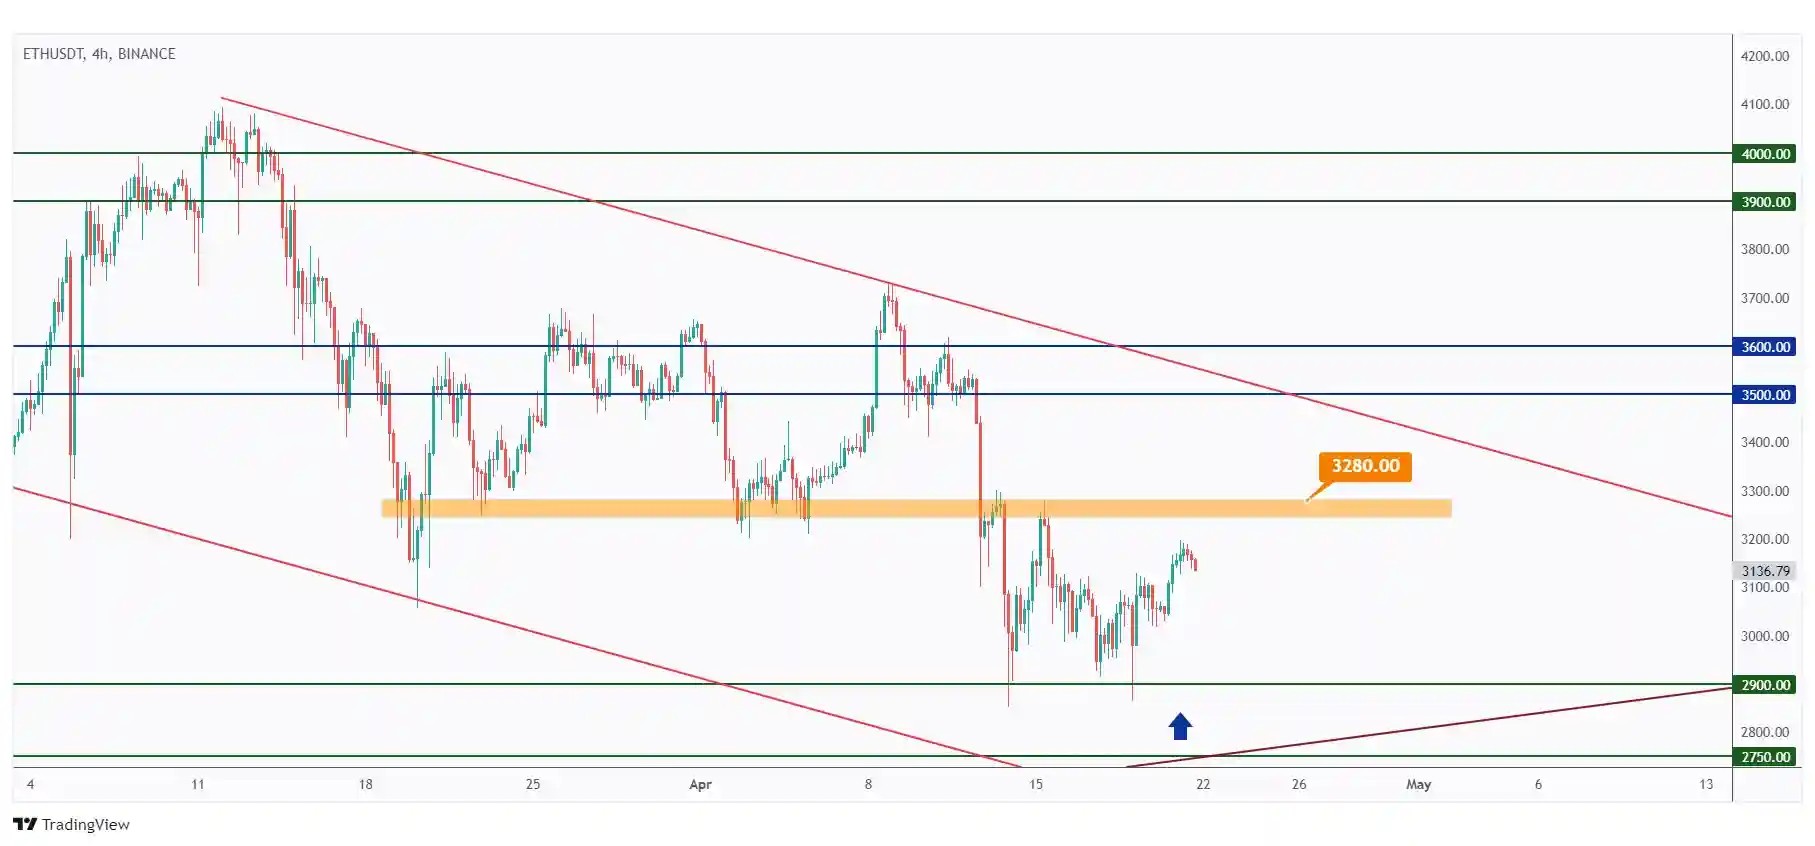 ETH 4h chart showing the last major high at $3280 that we need a break above for the bulls to take over.